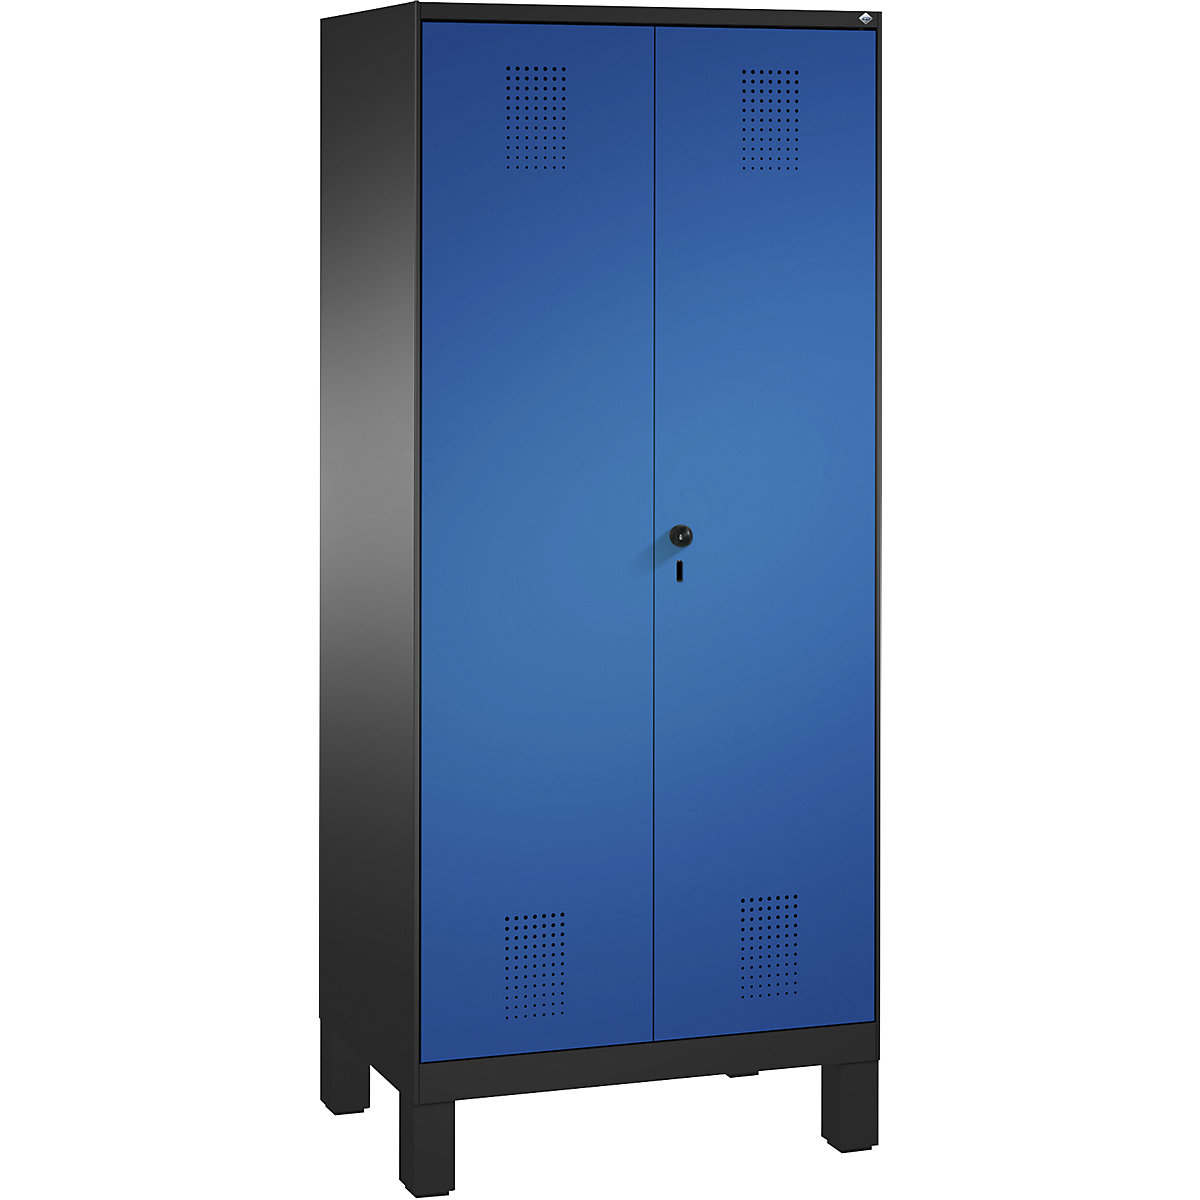 EVOLO cloakroom locker, doors close in the middle – C+P, 2 compartments, compartment width 400 mm, with feet, black grey / gentian blue-4